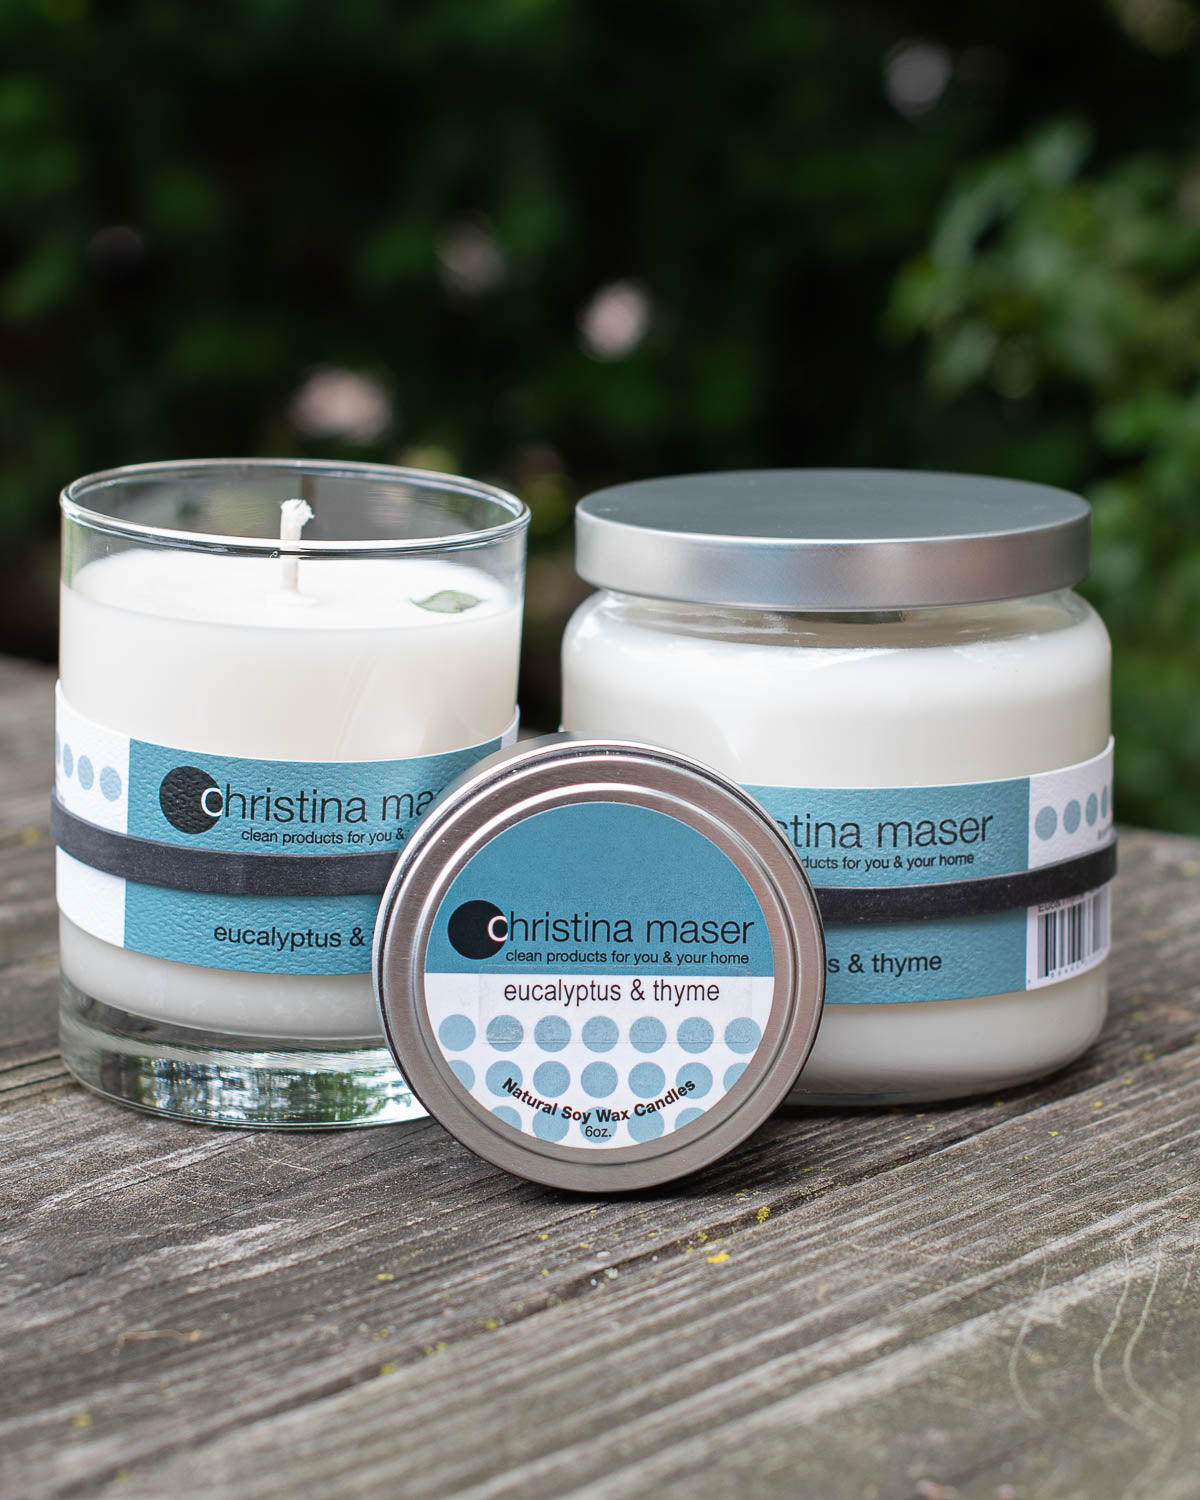 Christina Maser Eucalyptus Thyme Tin Candle - 6 Ounces - Weavers Way Co-op (Ambler) - Delivered by Mercato